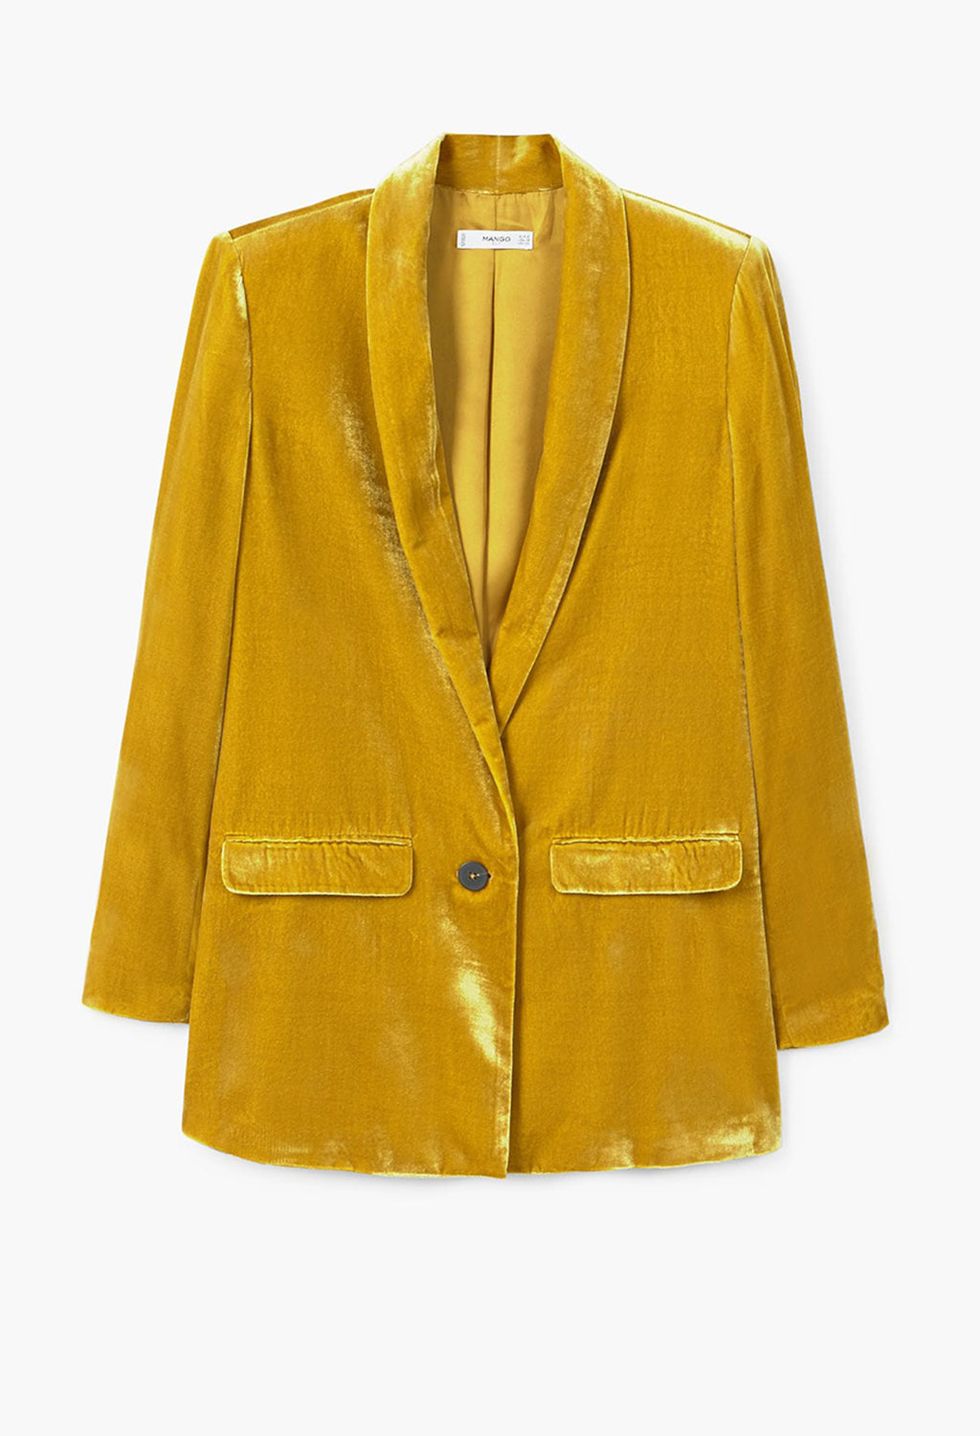 Clothing, Outerwear, Yellow, Jacket, Sleeve, Blazer, Button, Top, Leather, 